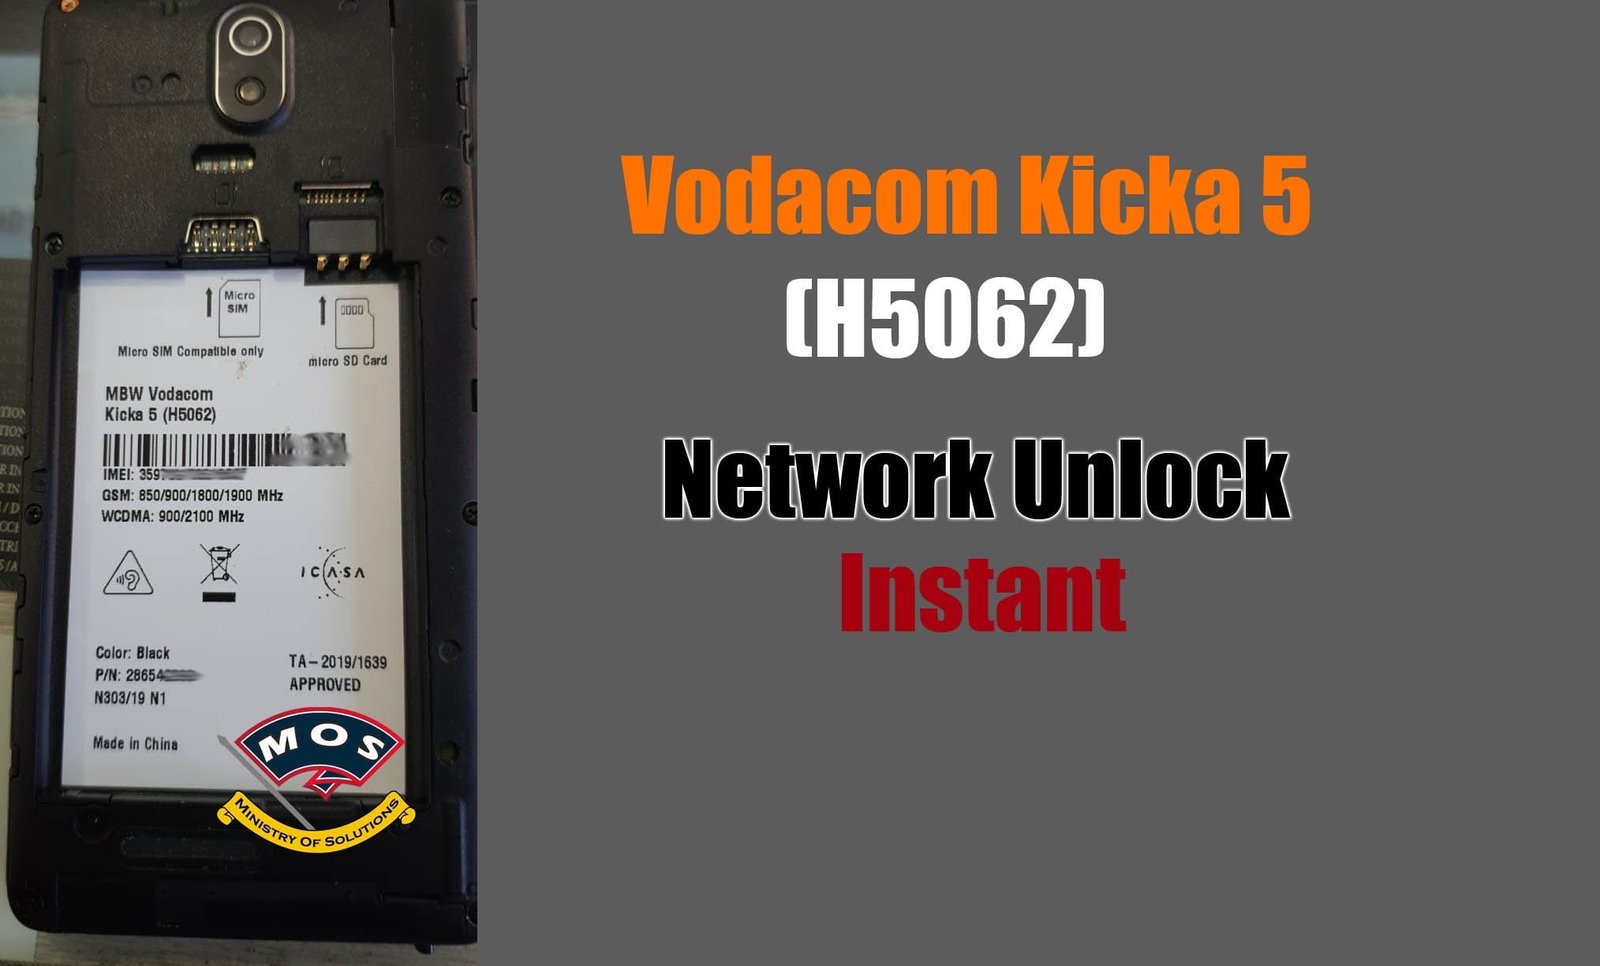 Vodacome Kicka 5 Network Unlock Instant Paid Service Ministry